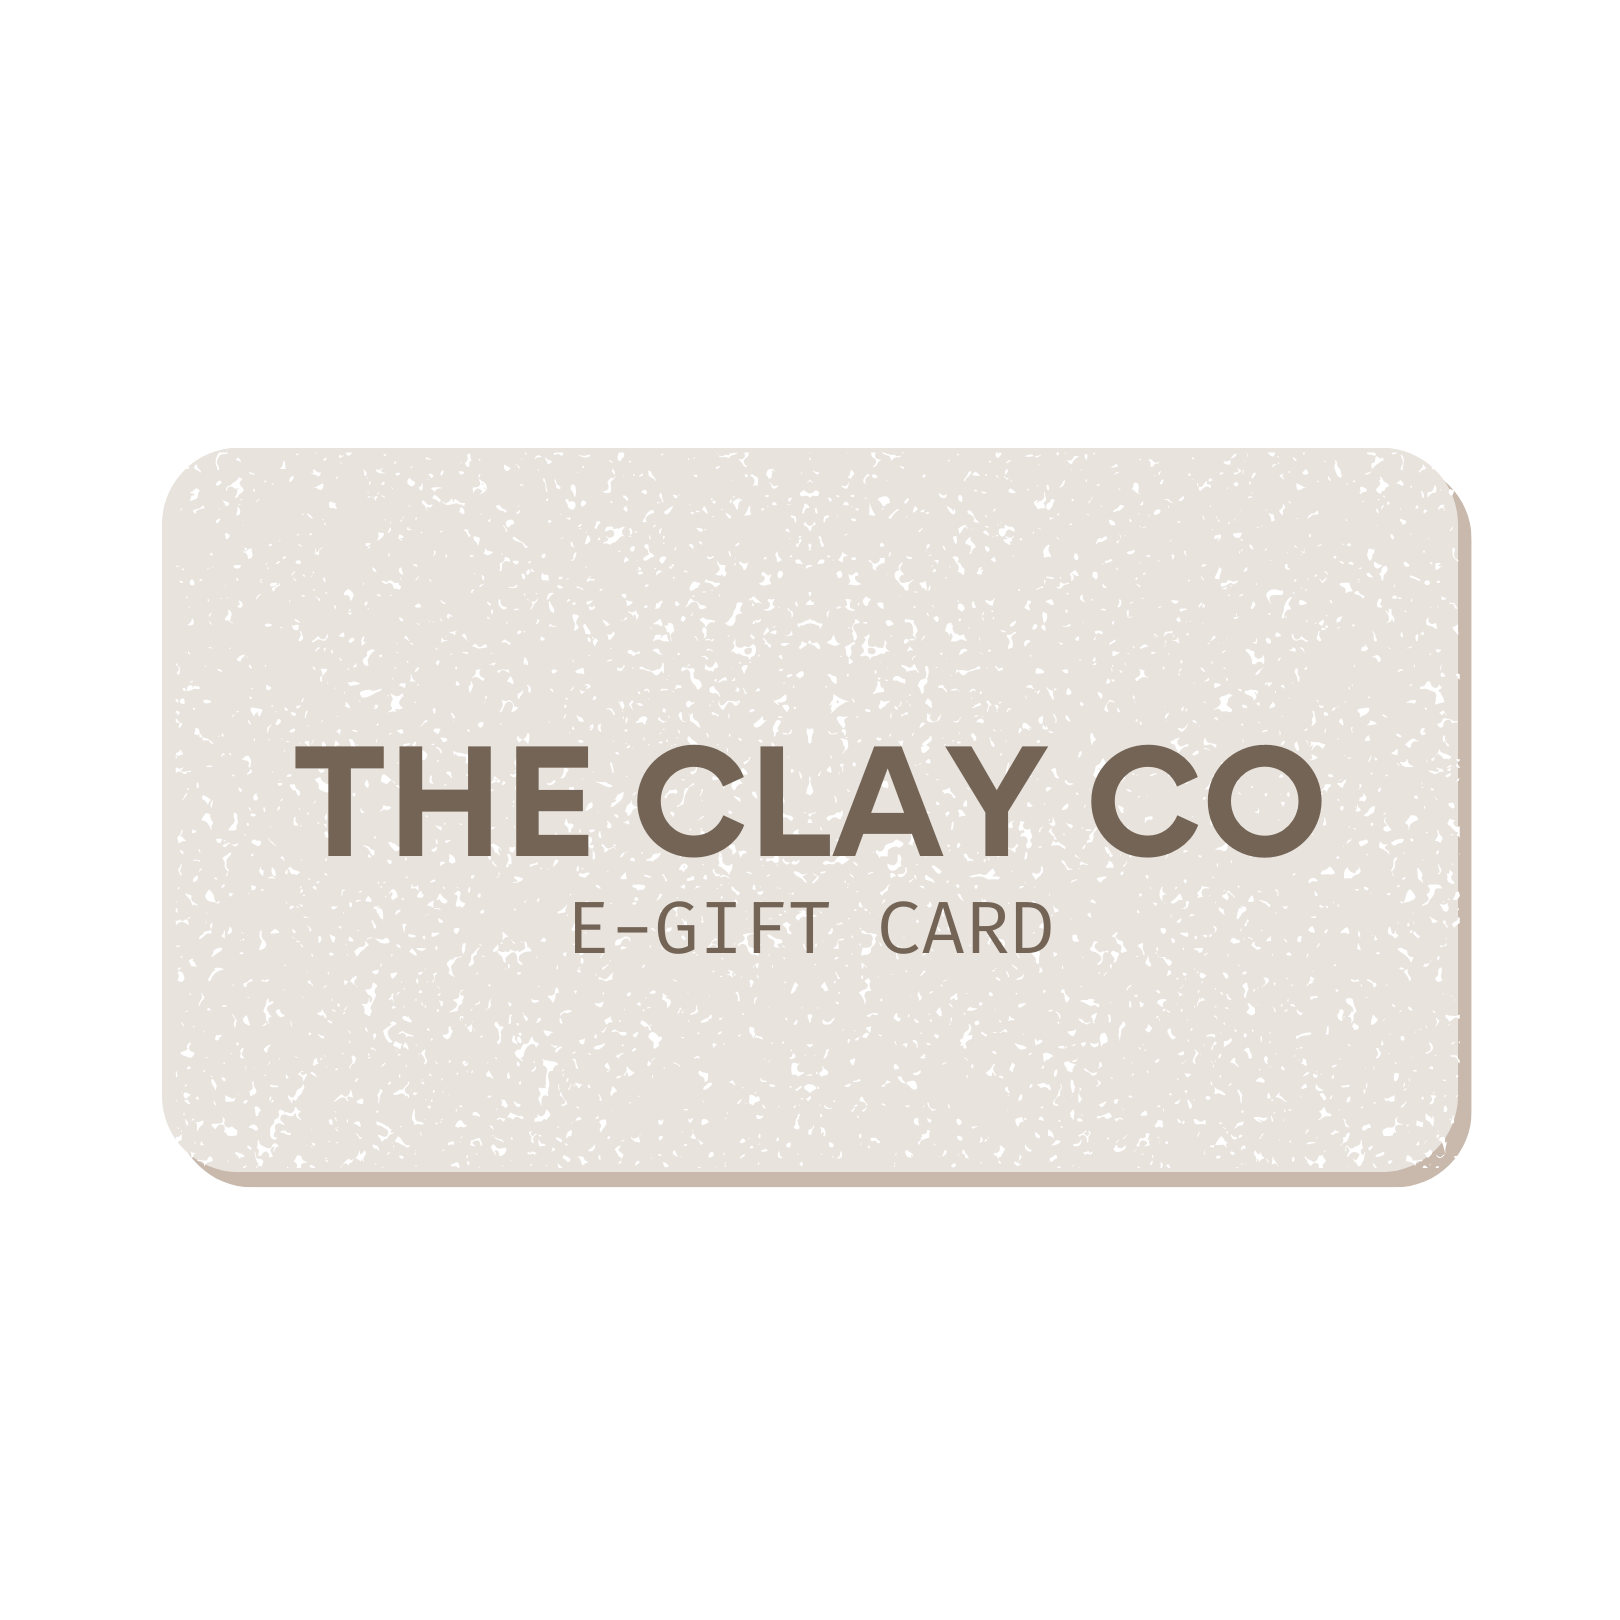 The Clay Co - DIY Pottery Kit by Jessie Norbury